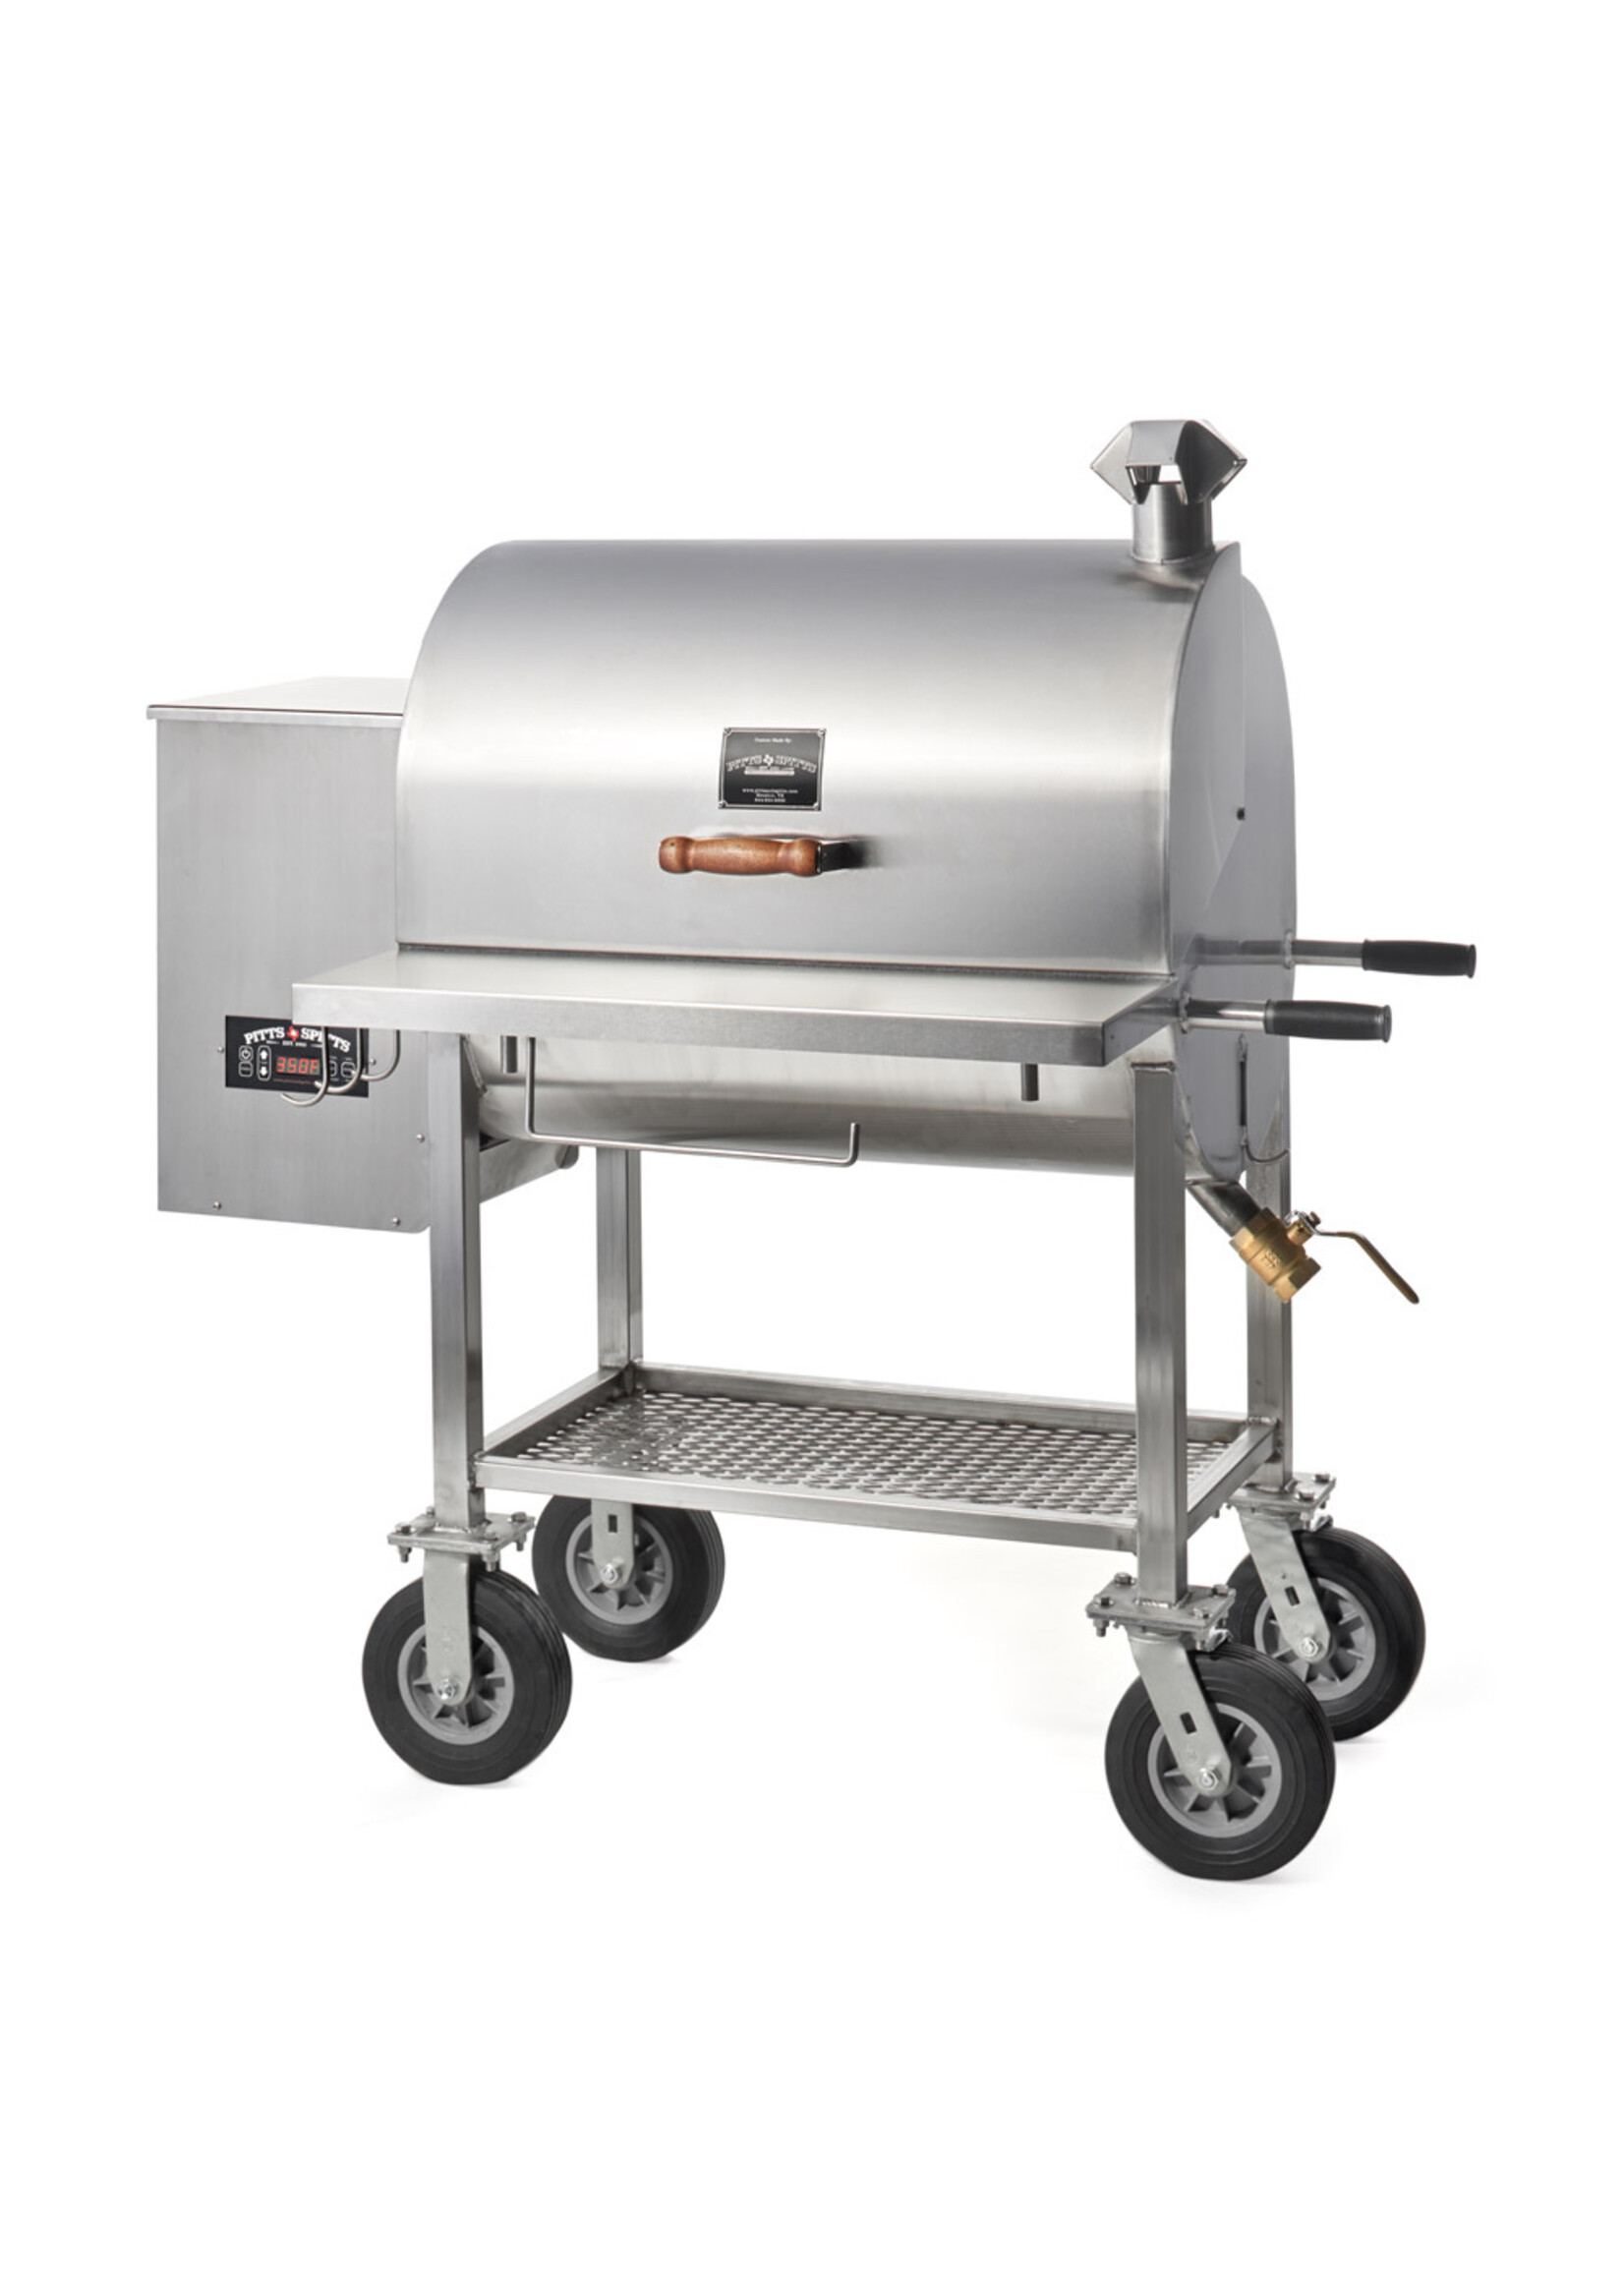 Pitts & Spitts Pitts & Spitts Maverick 850 Pellet Grill - Stainless